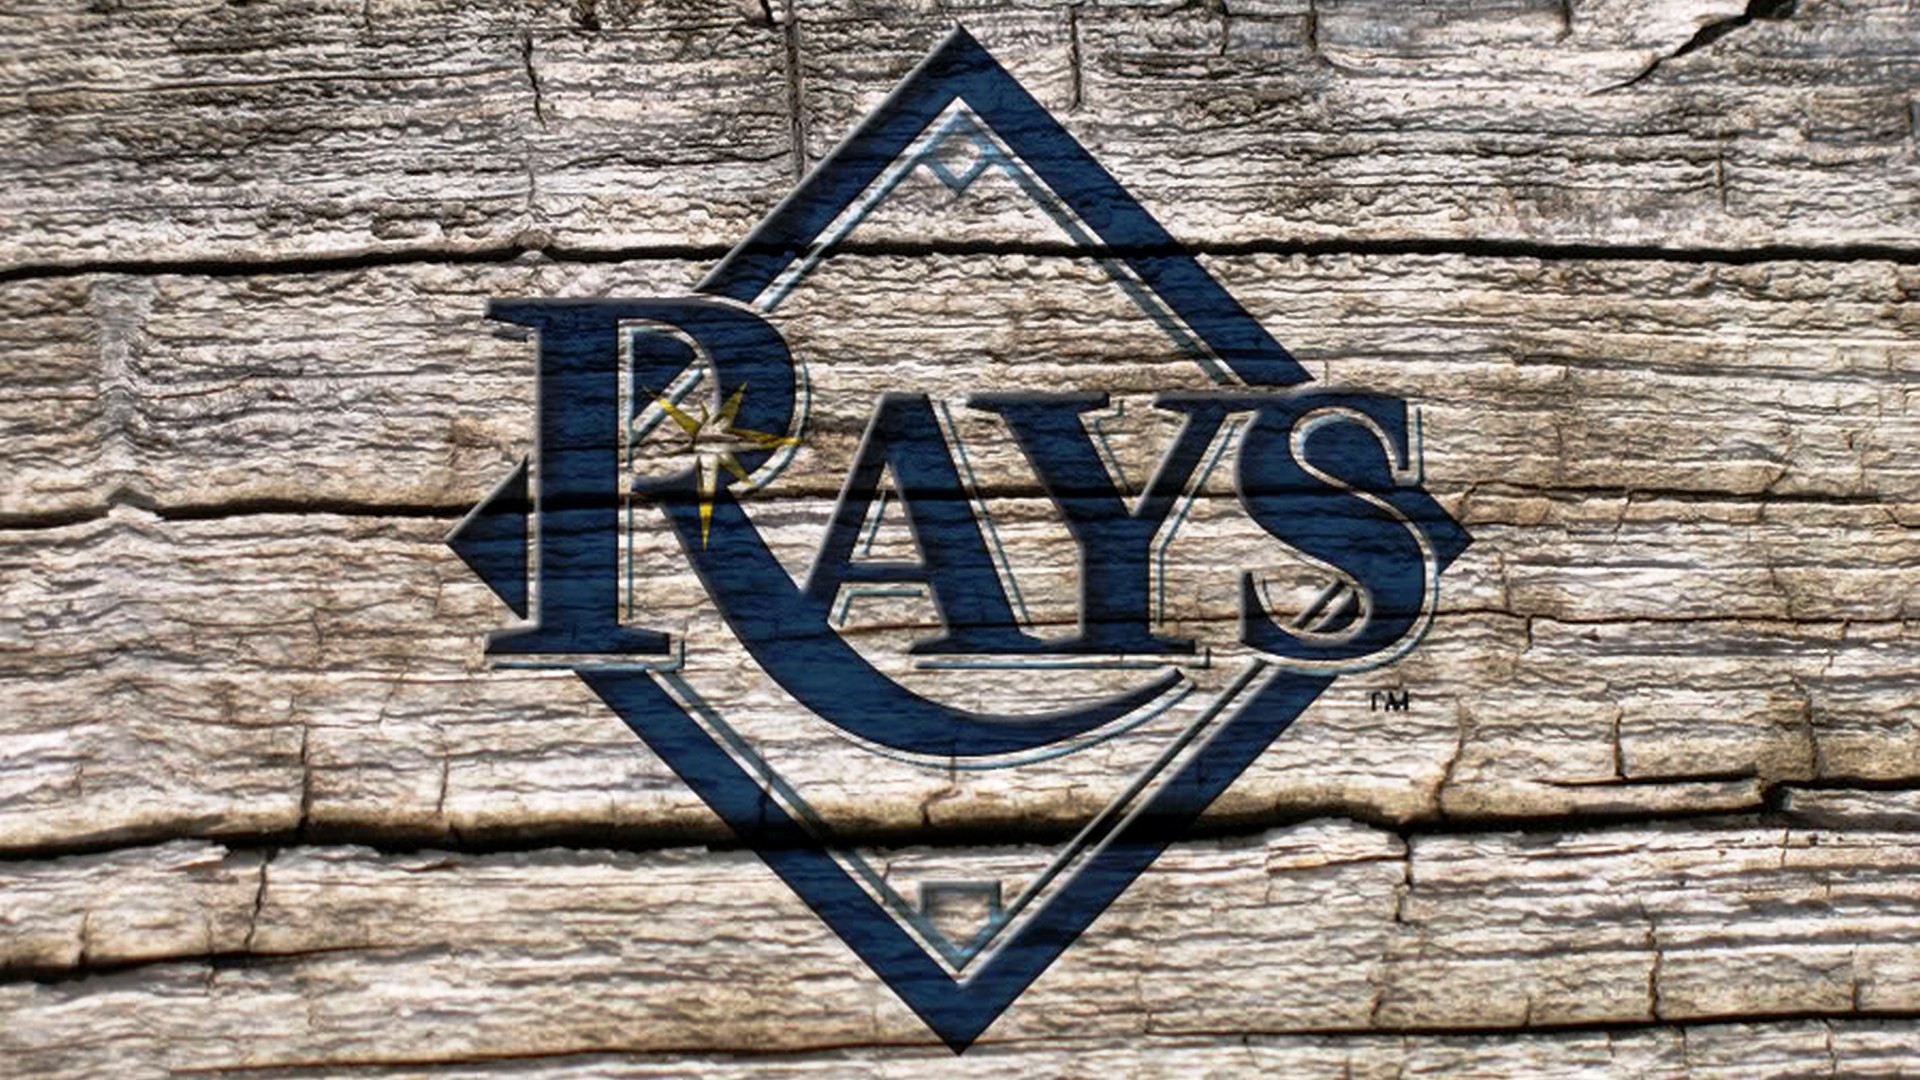 Wallpapers HD Tampa Bay Rays With high-resolution 1920X1080 pixel. You can use this wallpaper for Mac Desktop Wallpaper, Laptop Screensavers, Android Wallpapers, Tablet or iPhone Home Screen and another mobile phone device